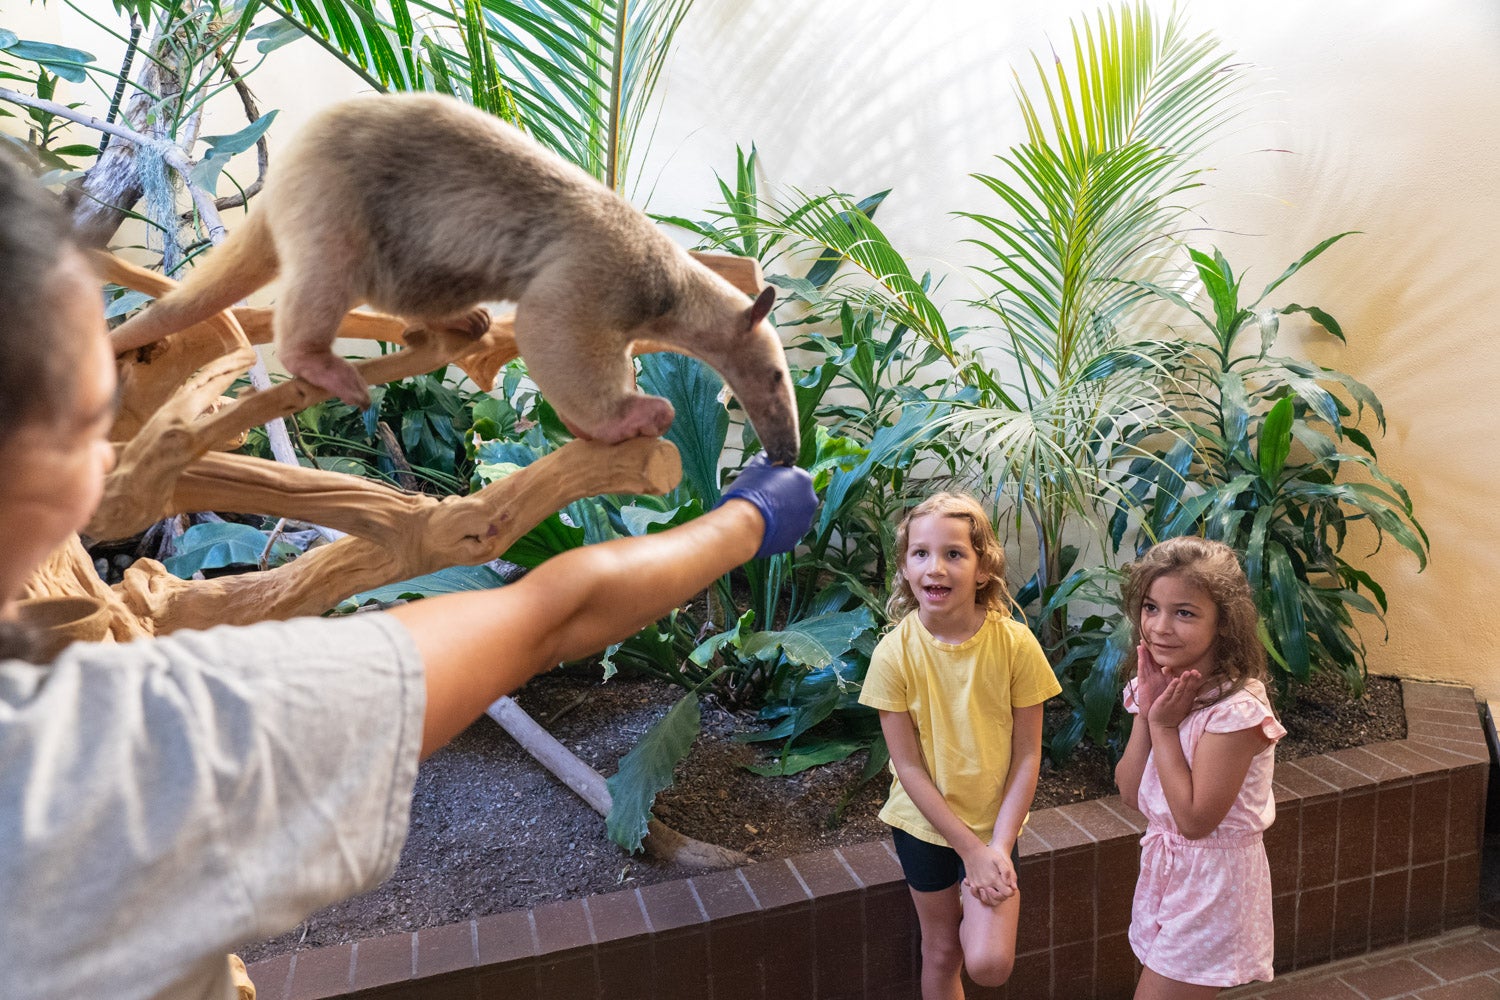 a zoo keeper feeds a tamandua in front of two young children